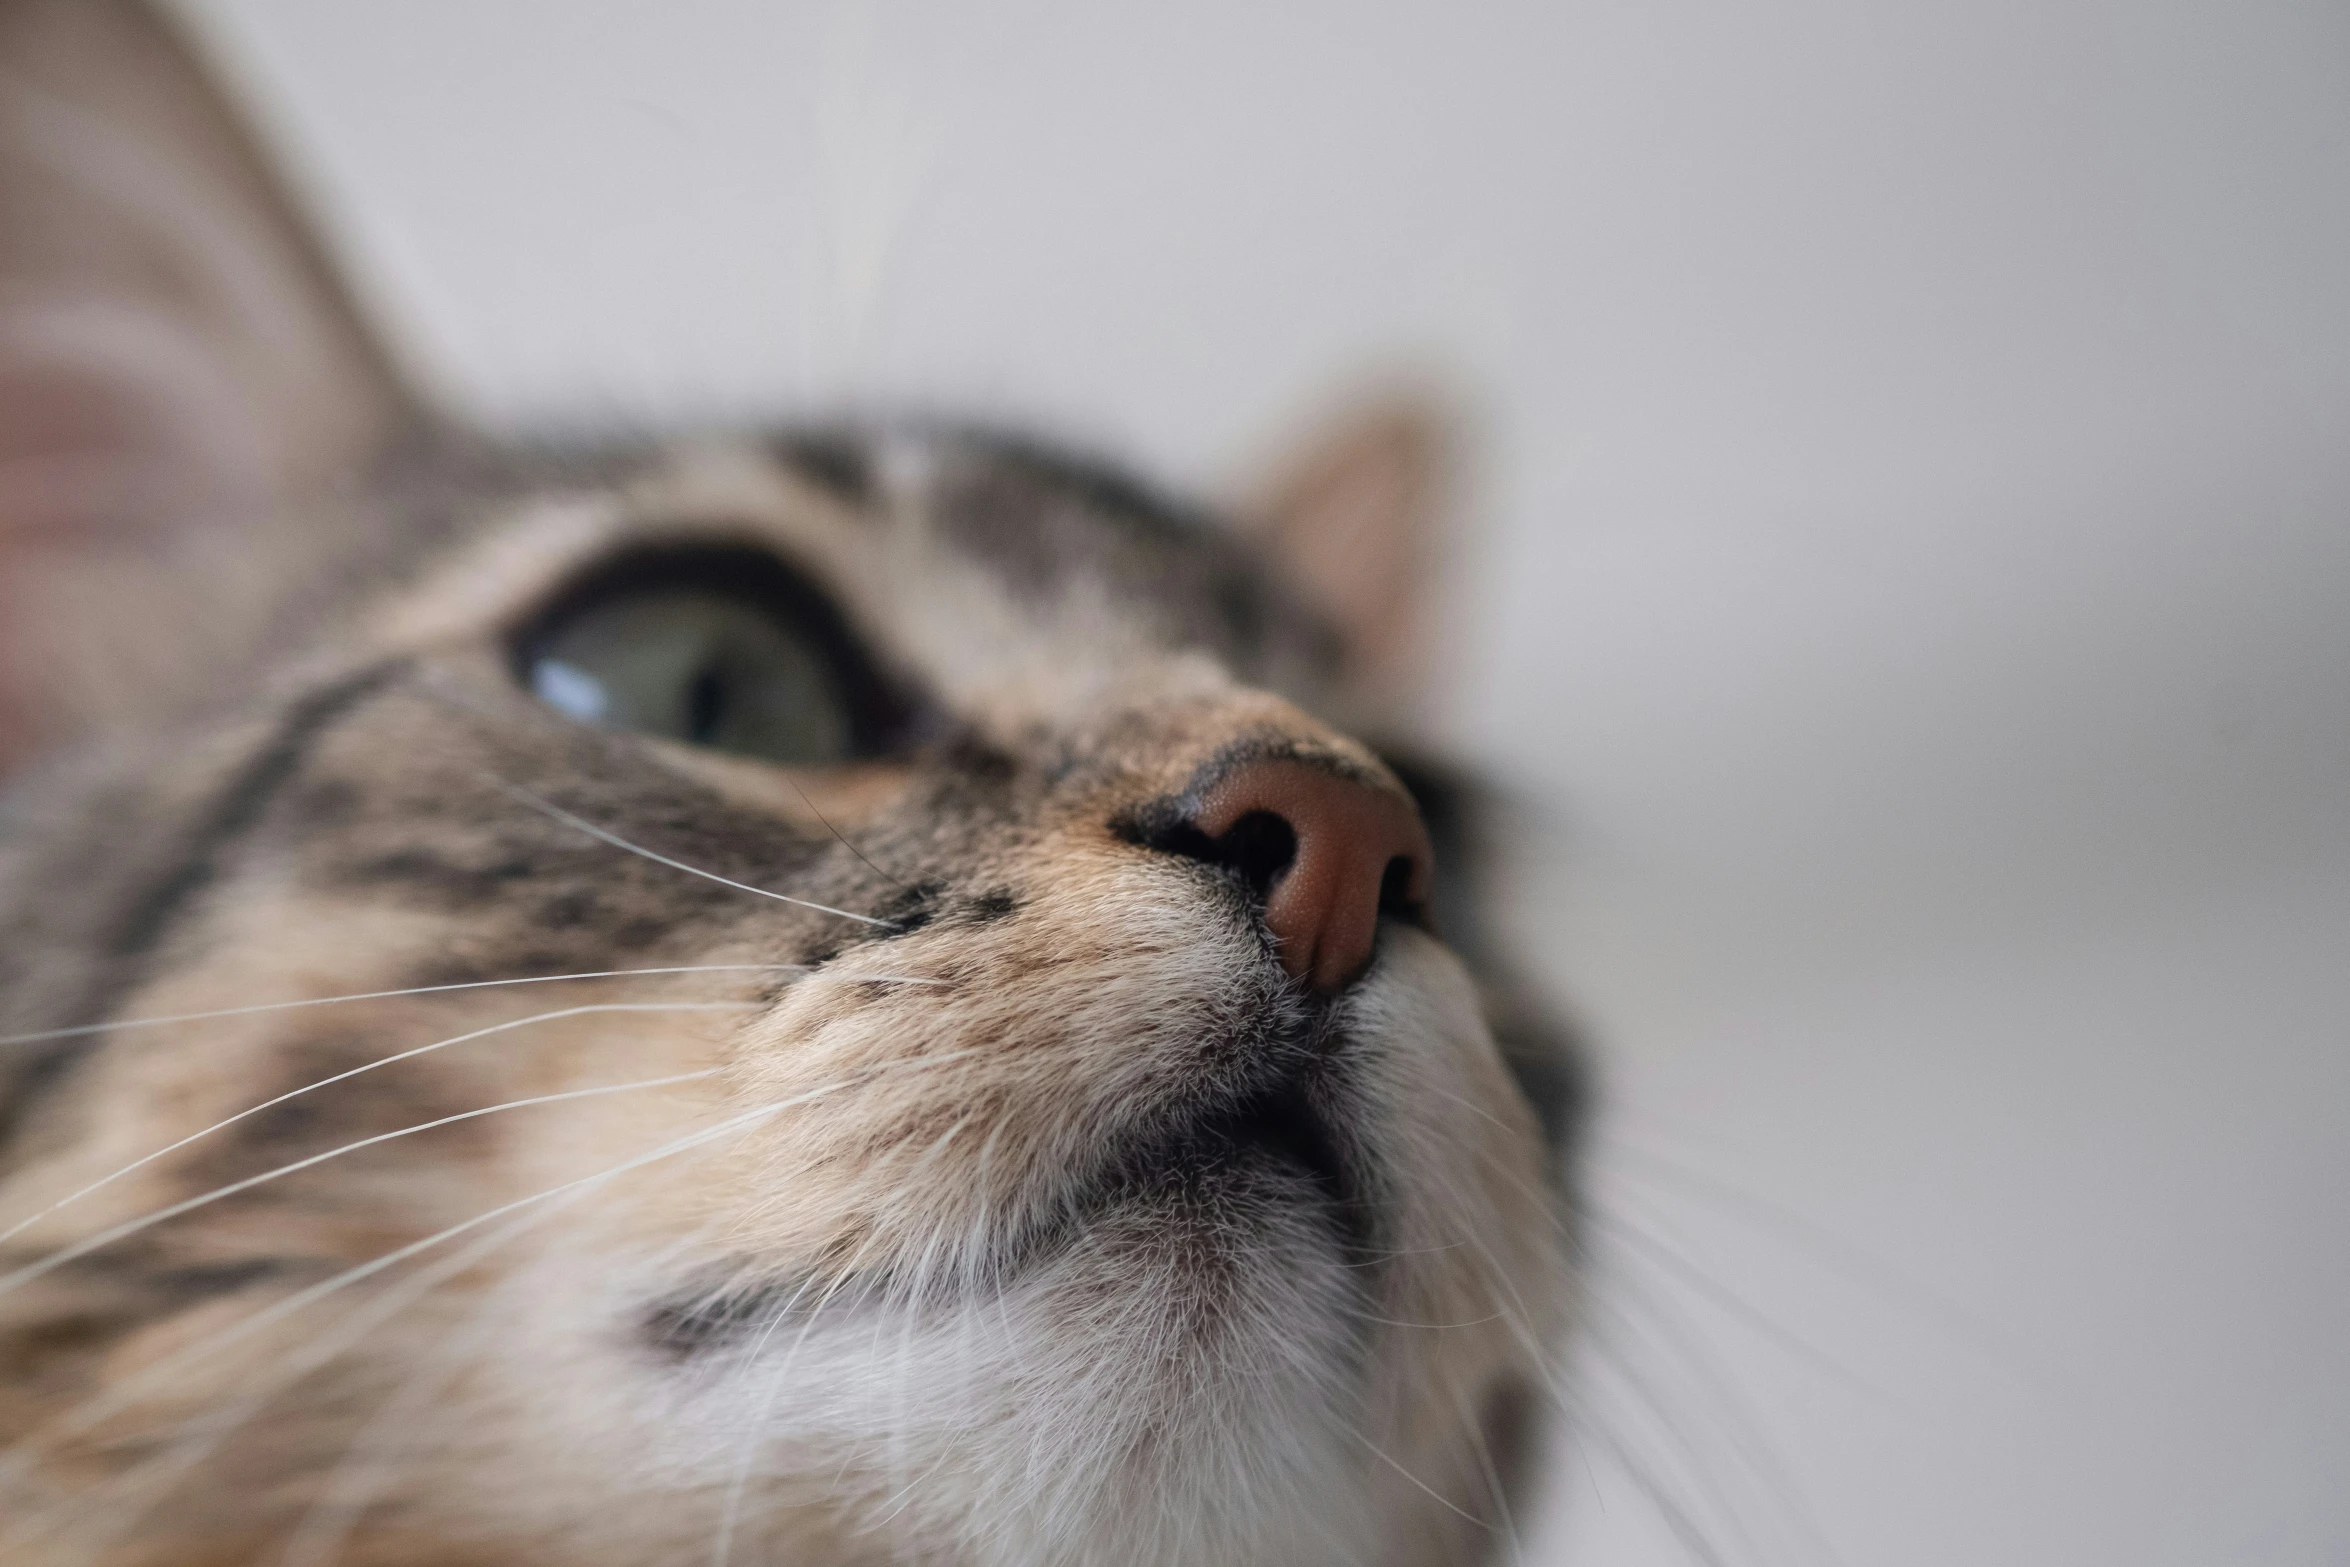 an extreme close up s of a cat's face